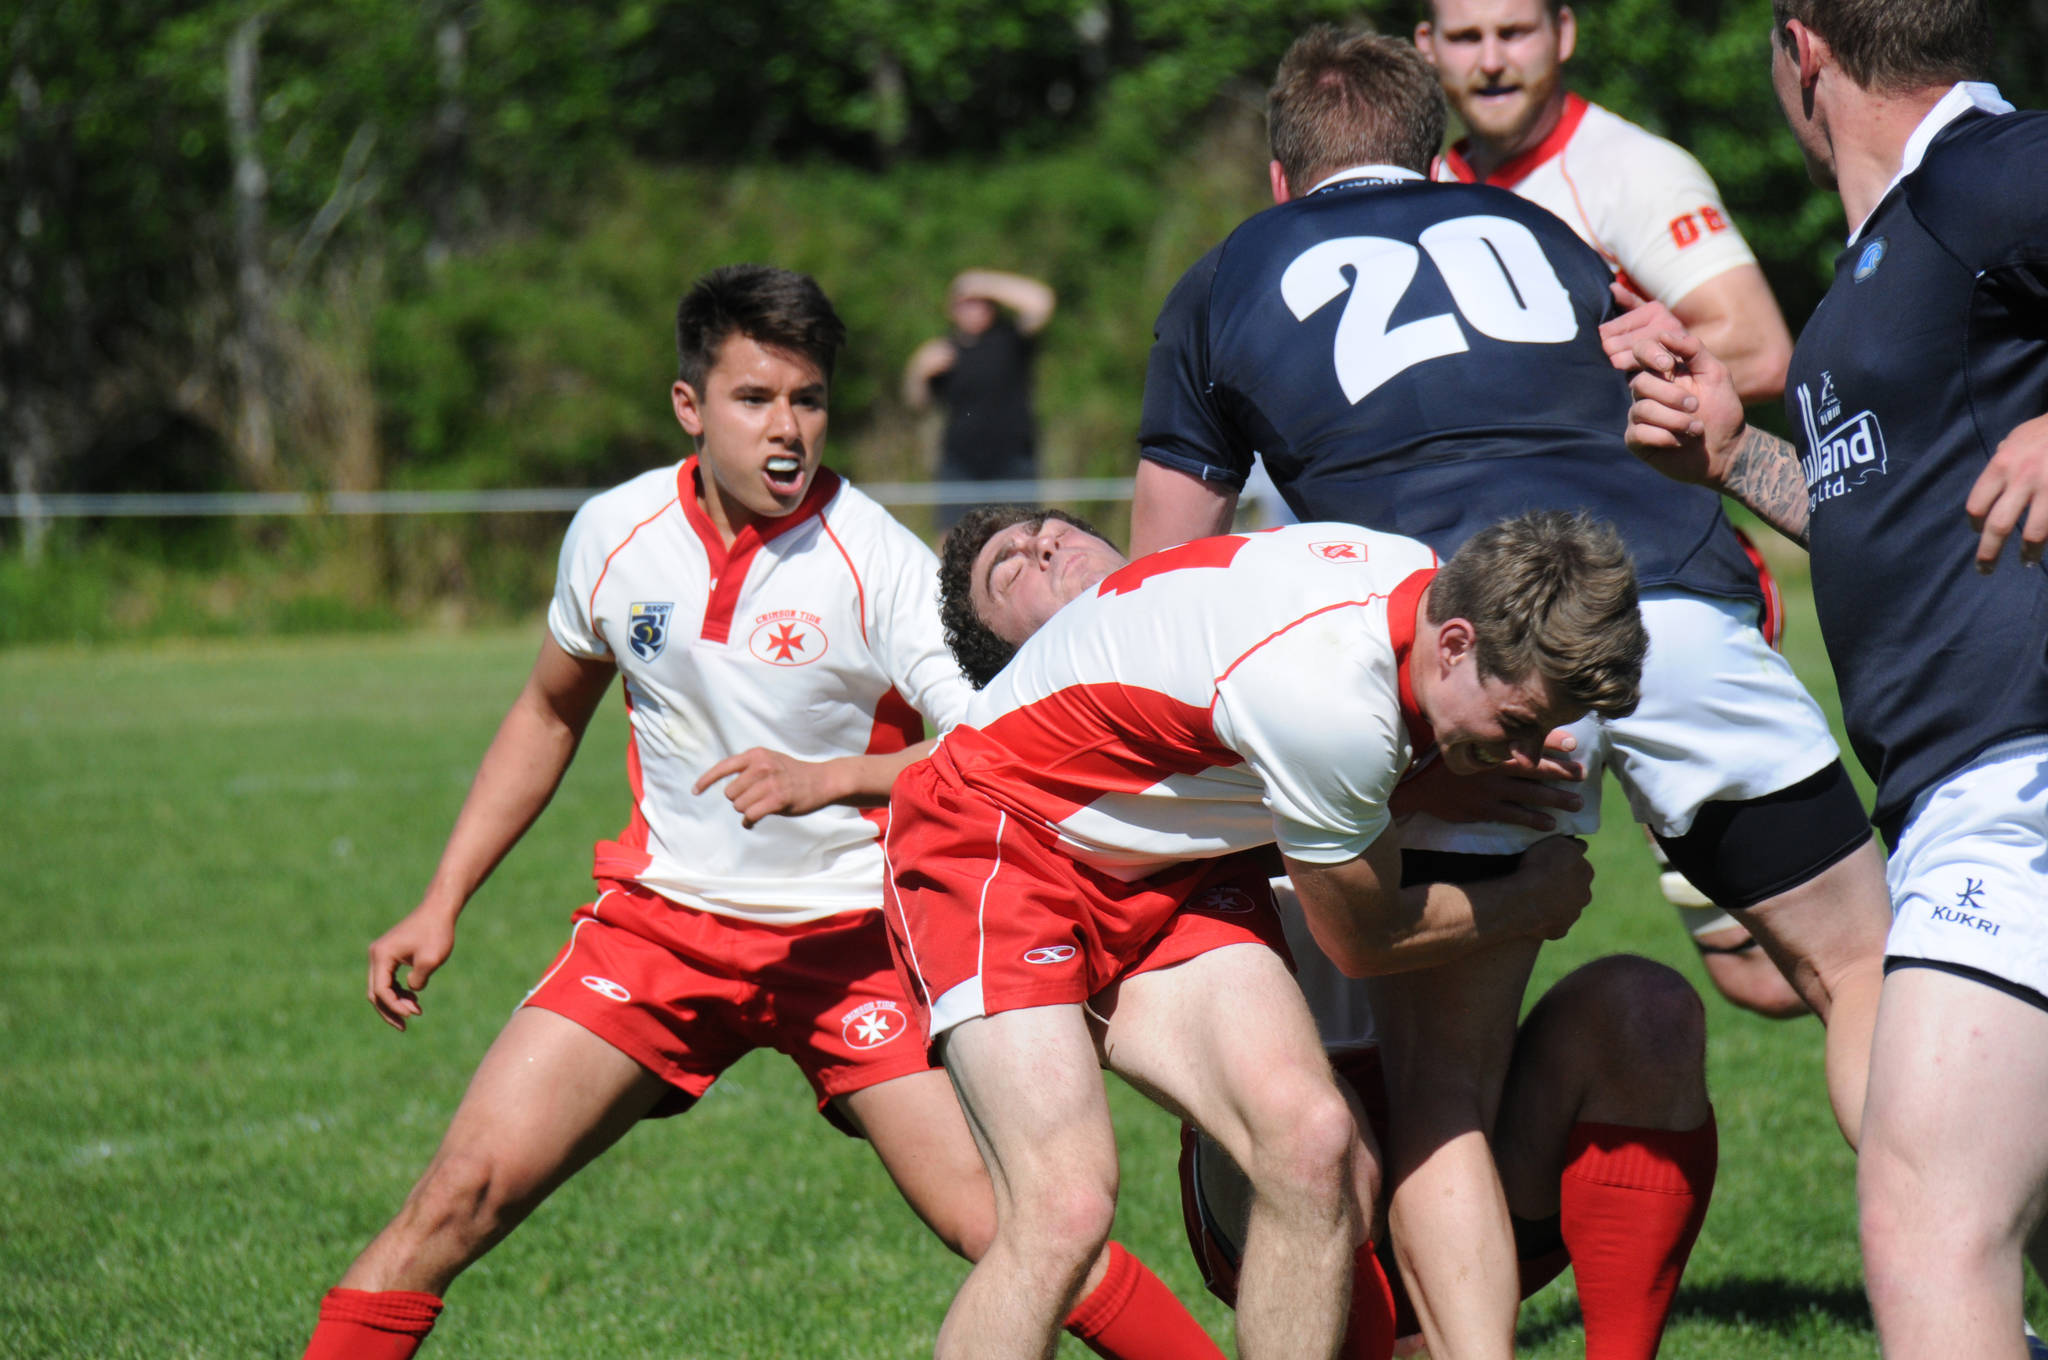 11888085_web1_Rugby-DukesBoot2-16may18_6066